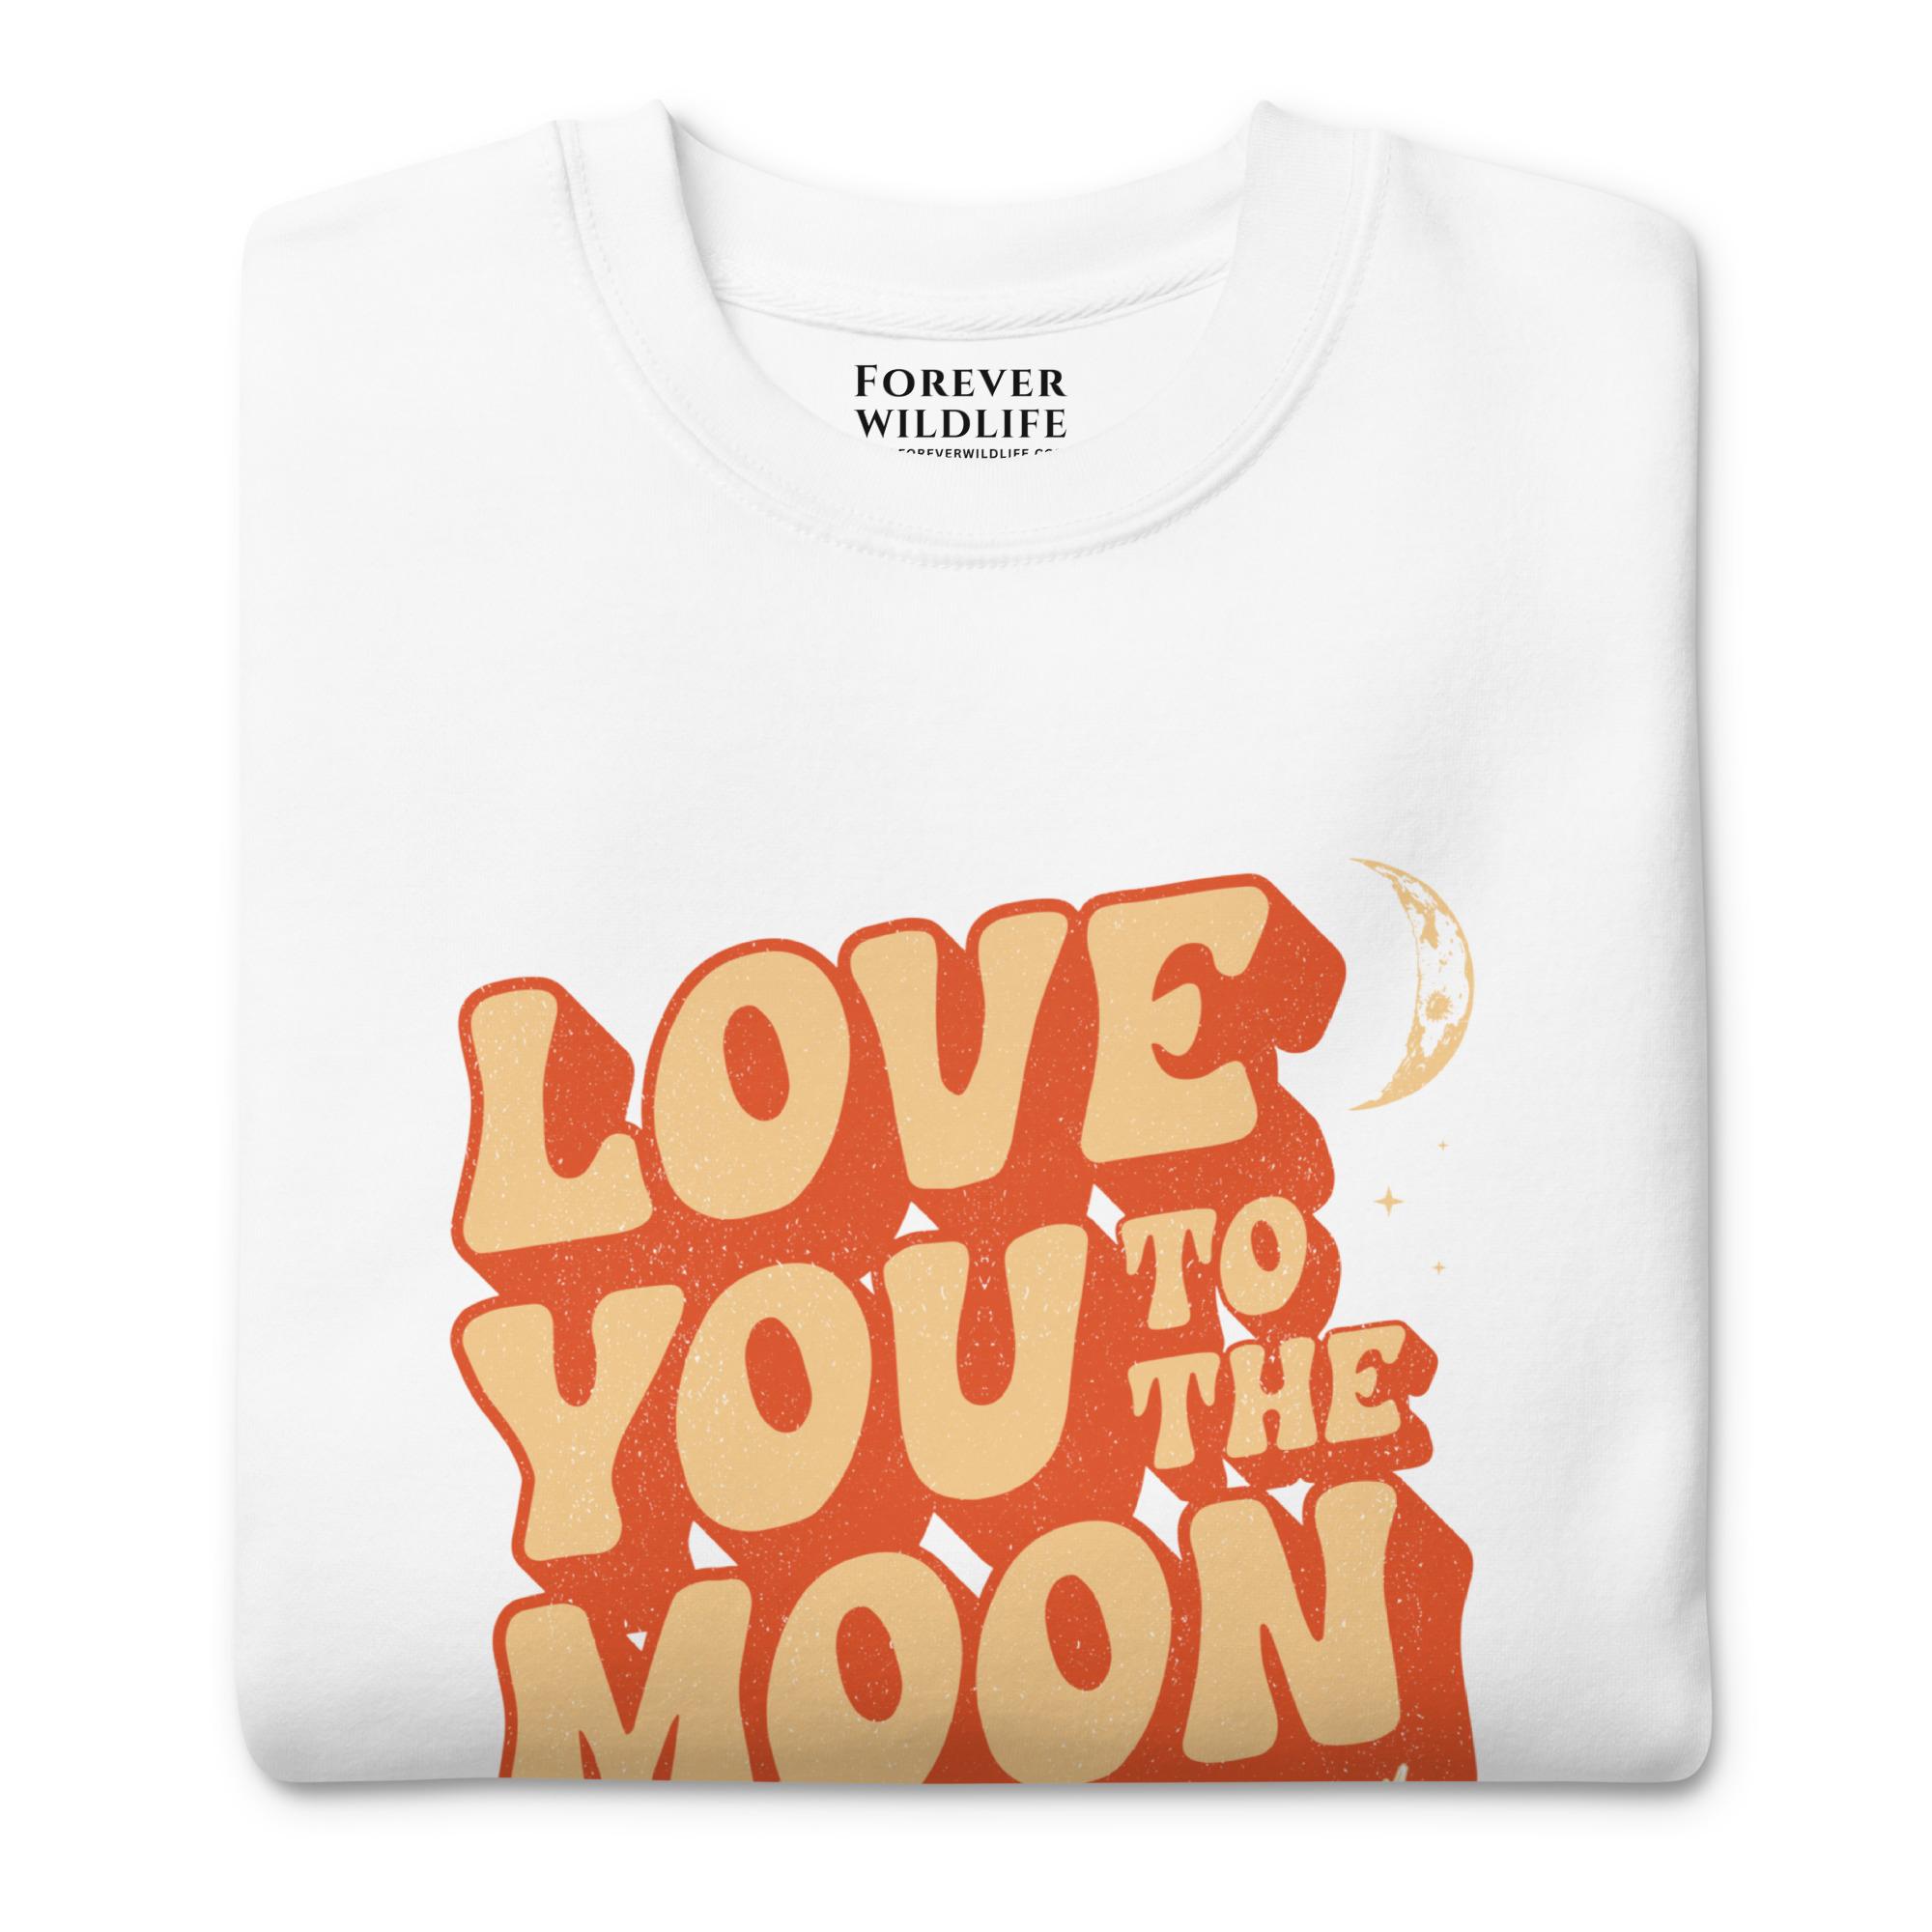 Eagle Sweatshirt in White-Premium Wildlife Animal Inspiration Sweatshirt Design with 'Love You To The Moon' text, part of Wildlife Sweatshirts & Clothing from Forever Wildlife.